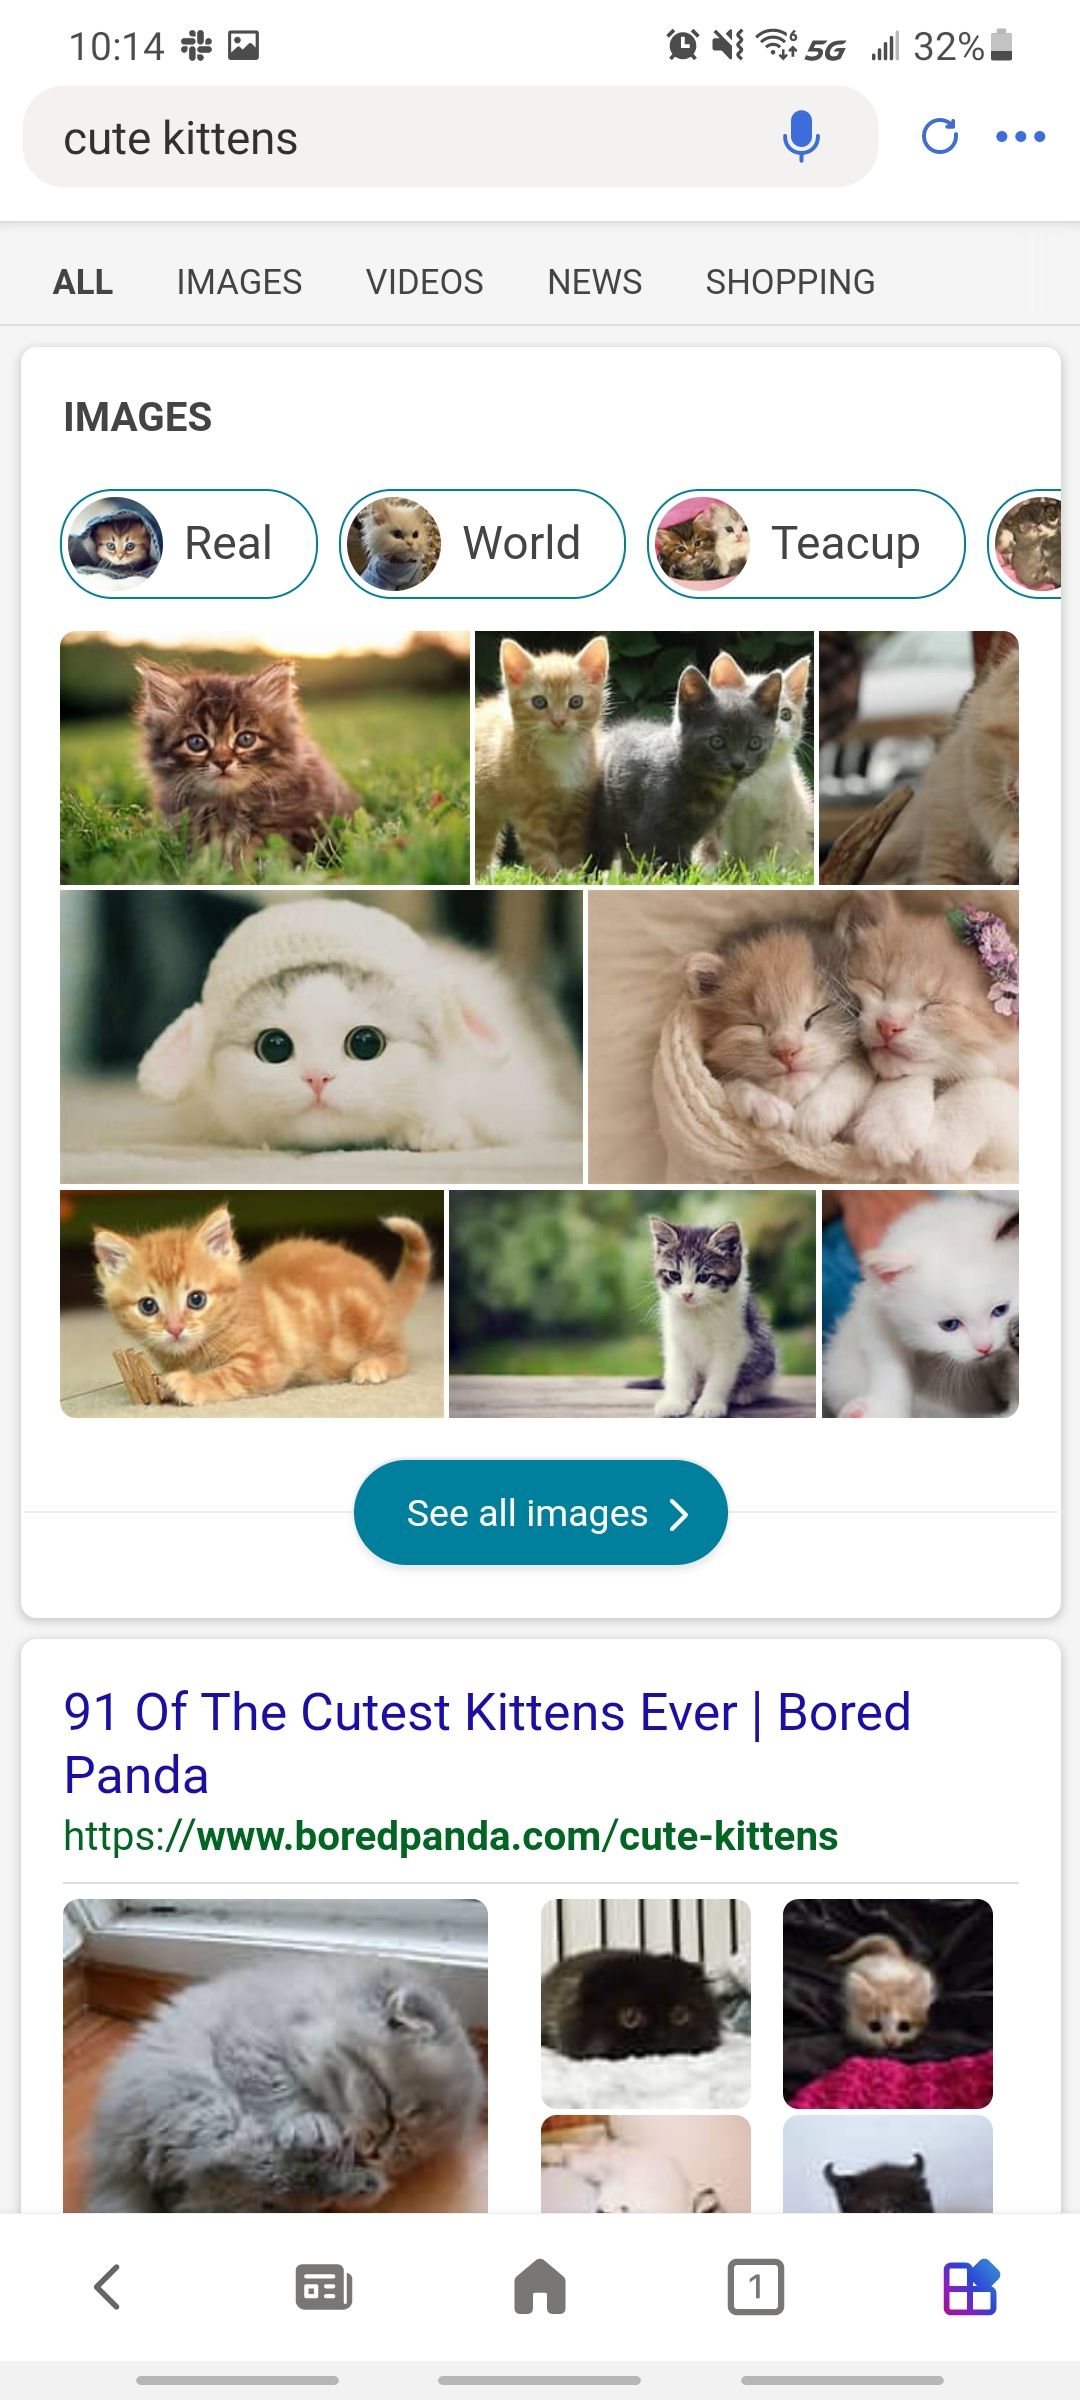 bing search for cute kittens